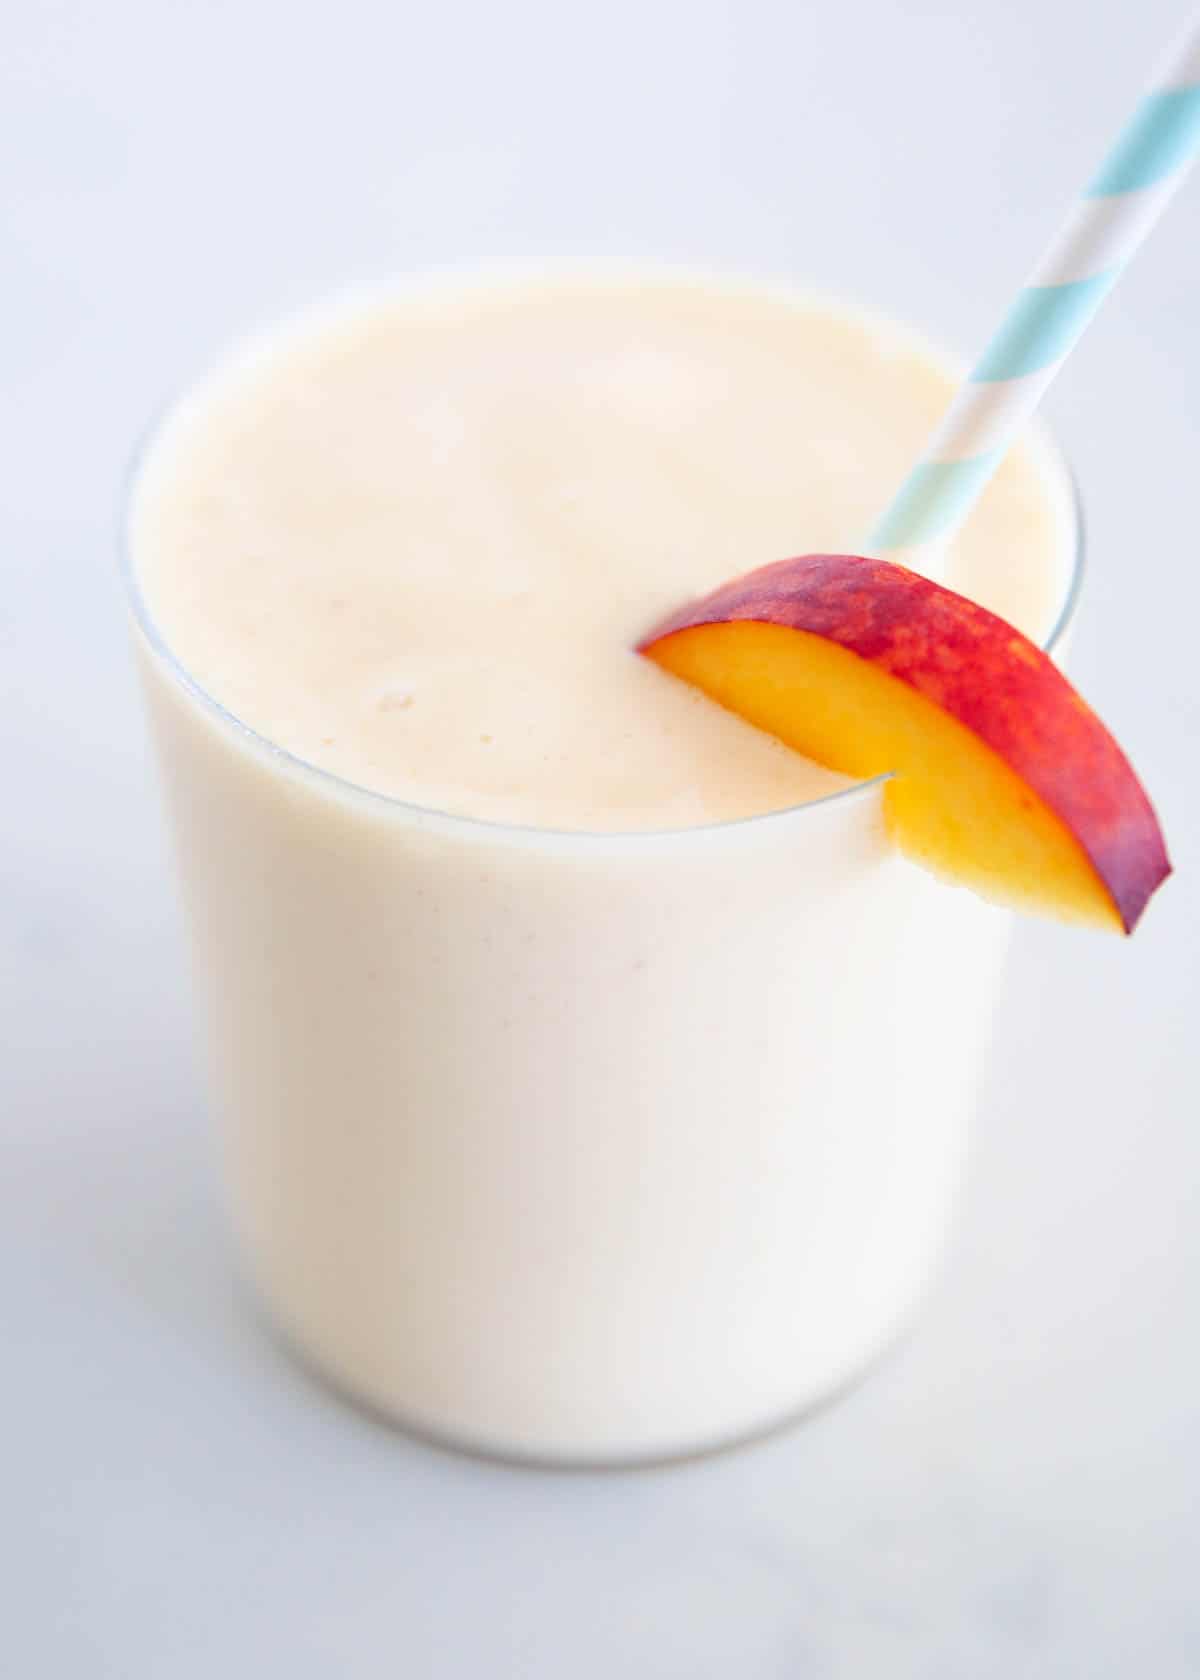 Peach smoothie in cup with straw.